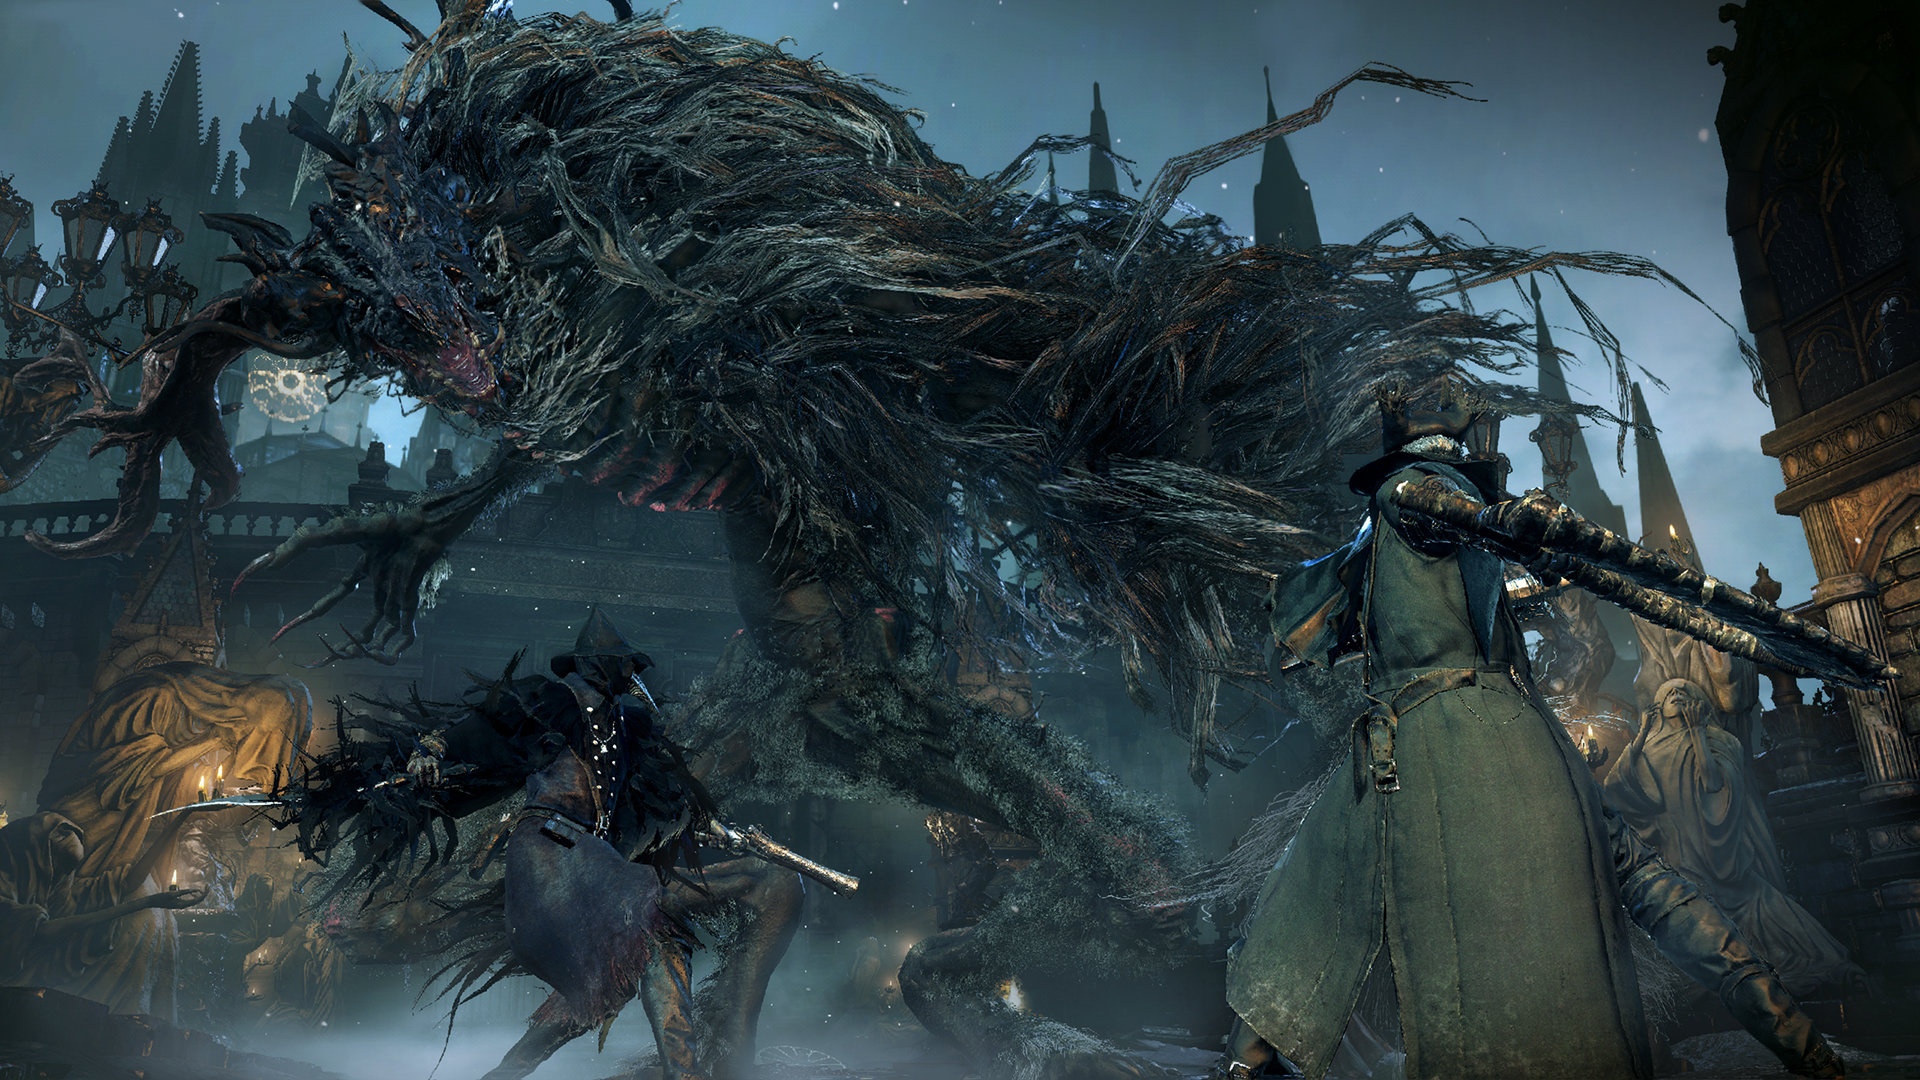 Bloodborne Community Is Coming Together With Another Return To Yharnam Event This Year